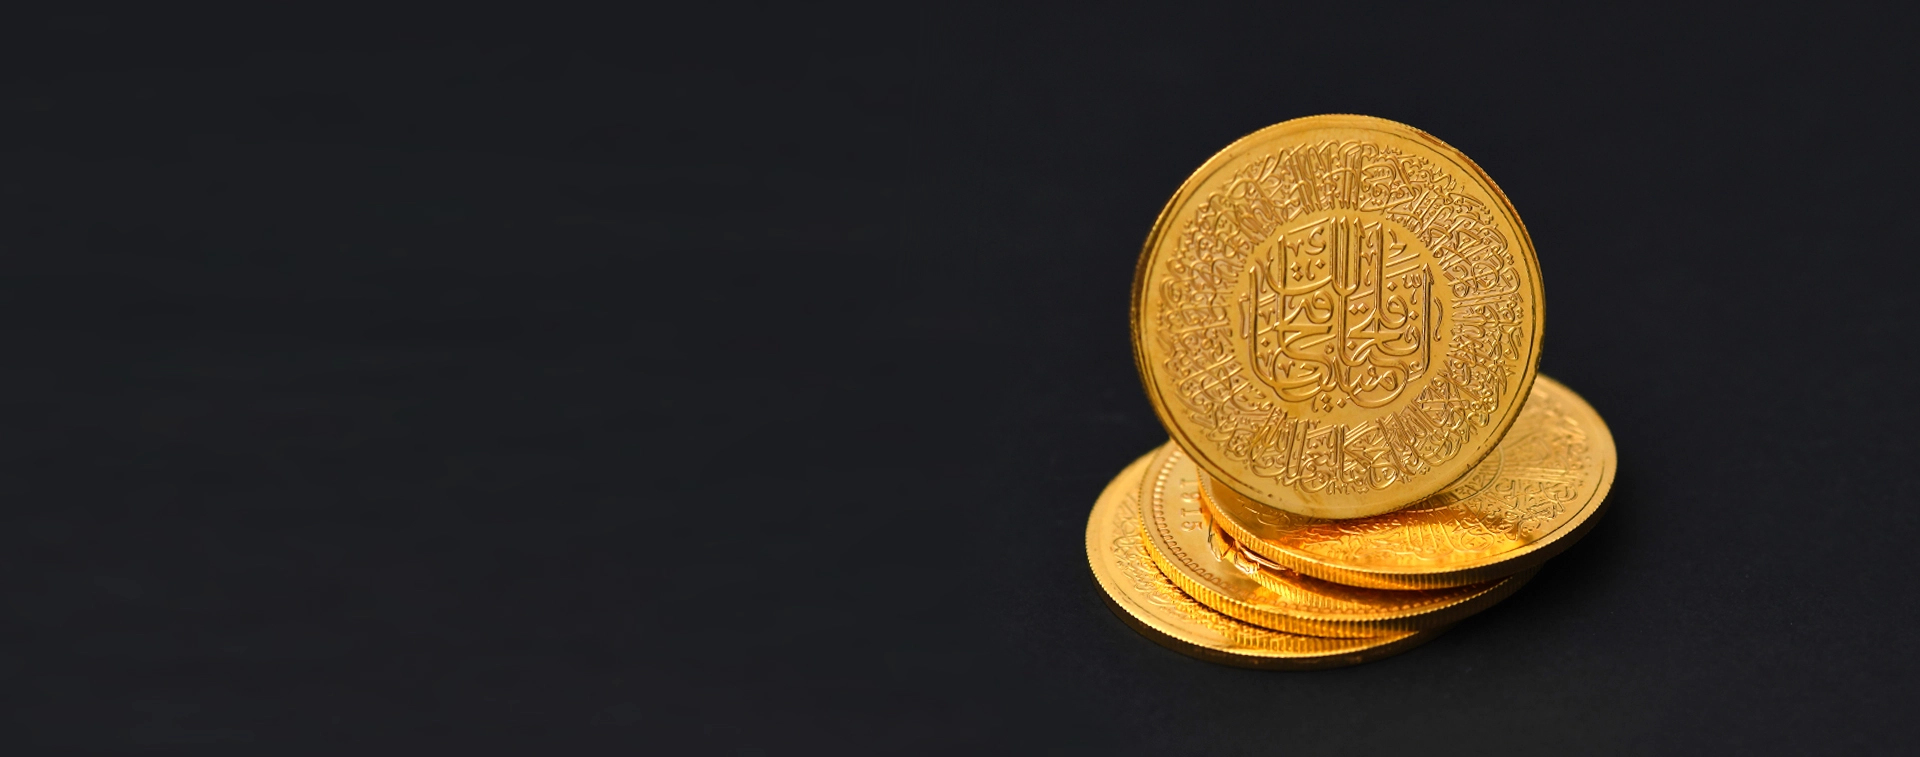 Top 6 Bitcoin Investment Sites for April 2023: Verified